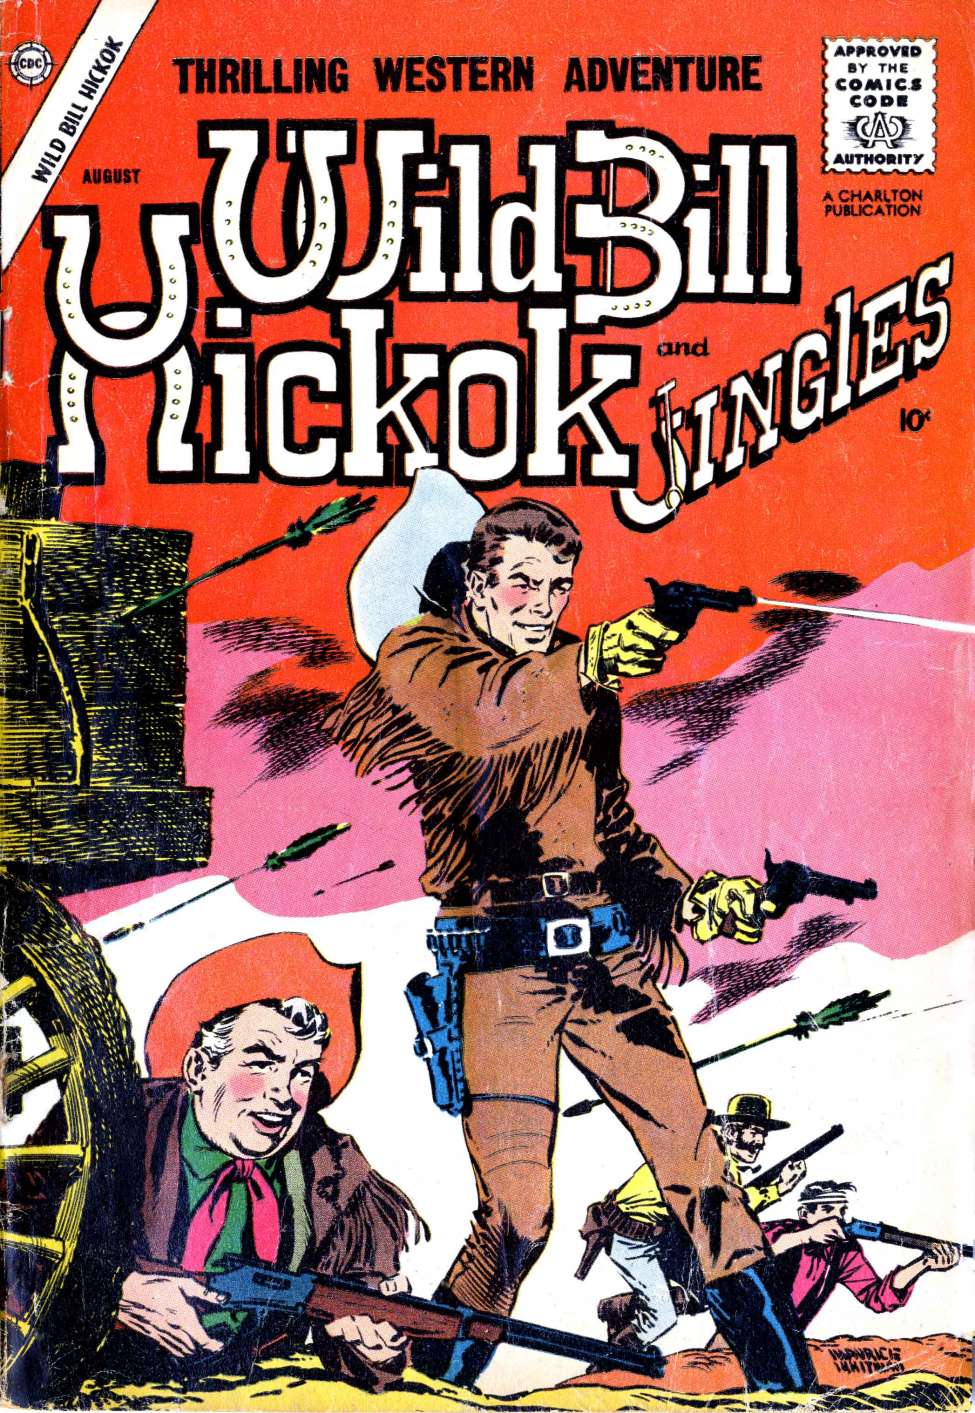 Book Cover For Wild Bill Hickok and Jingles 68 - Version 1